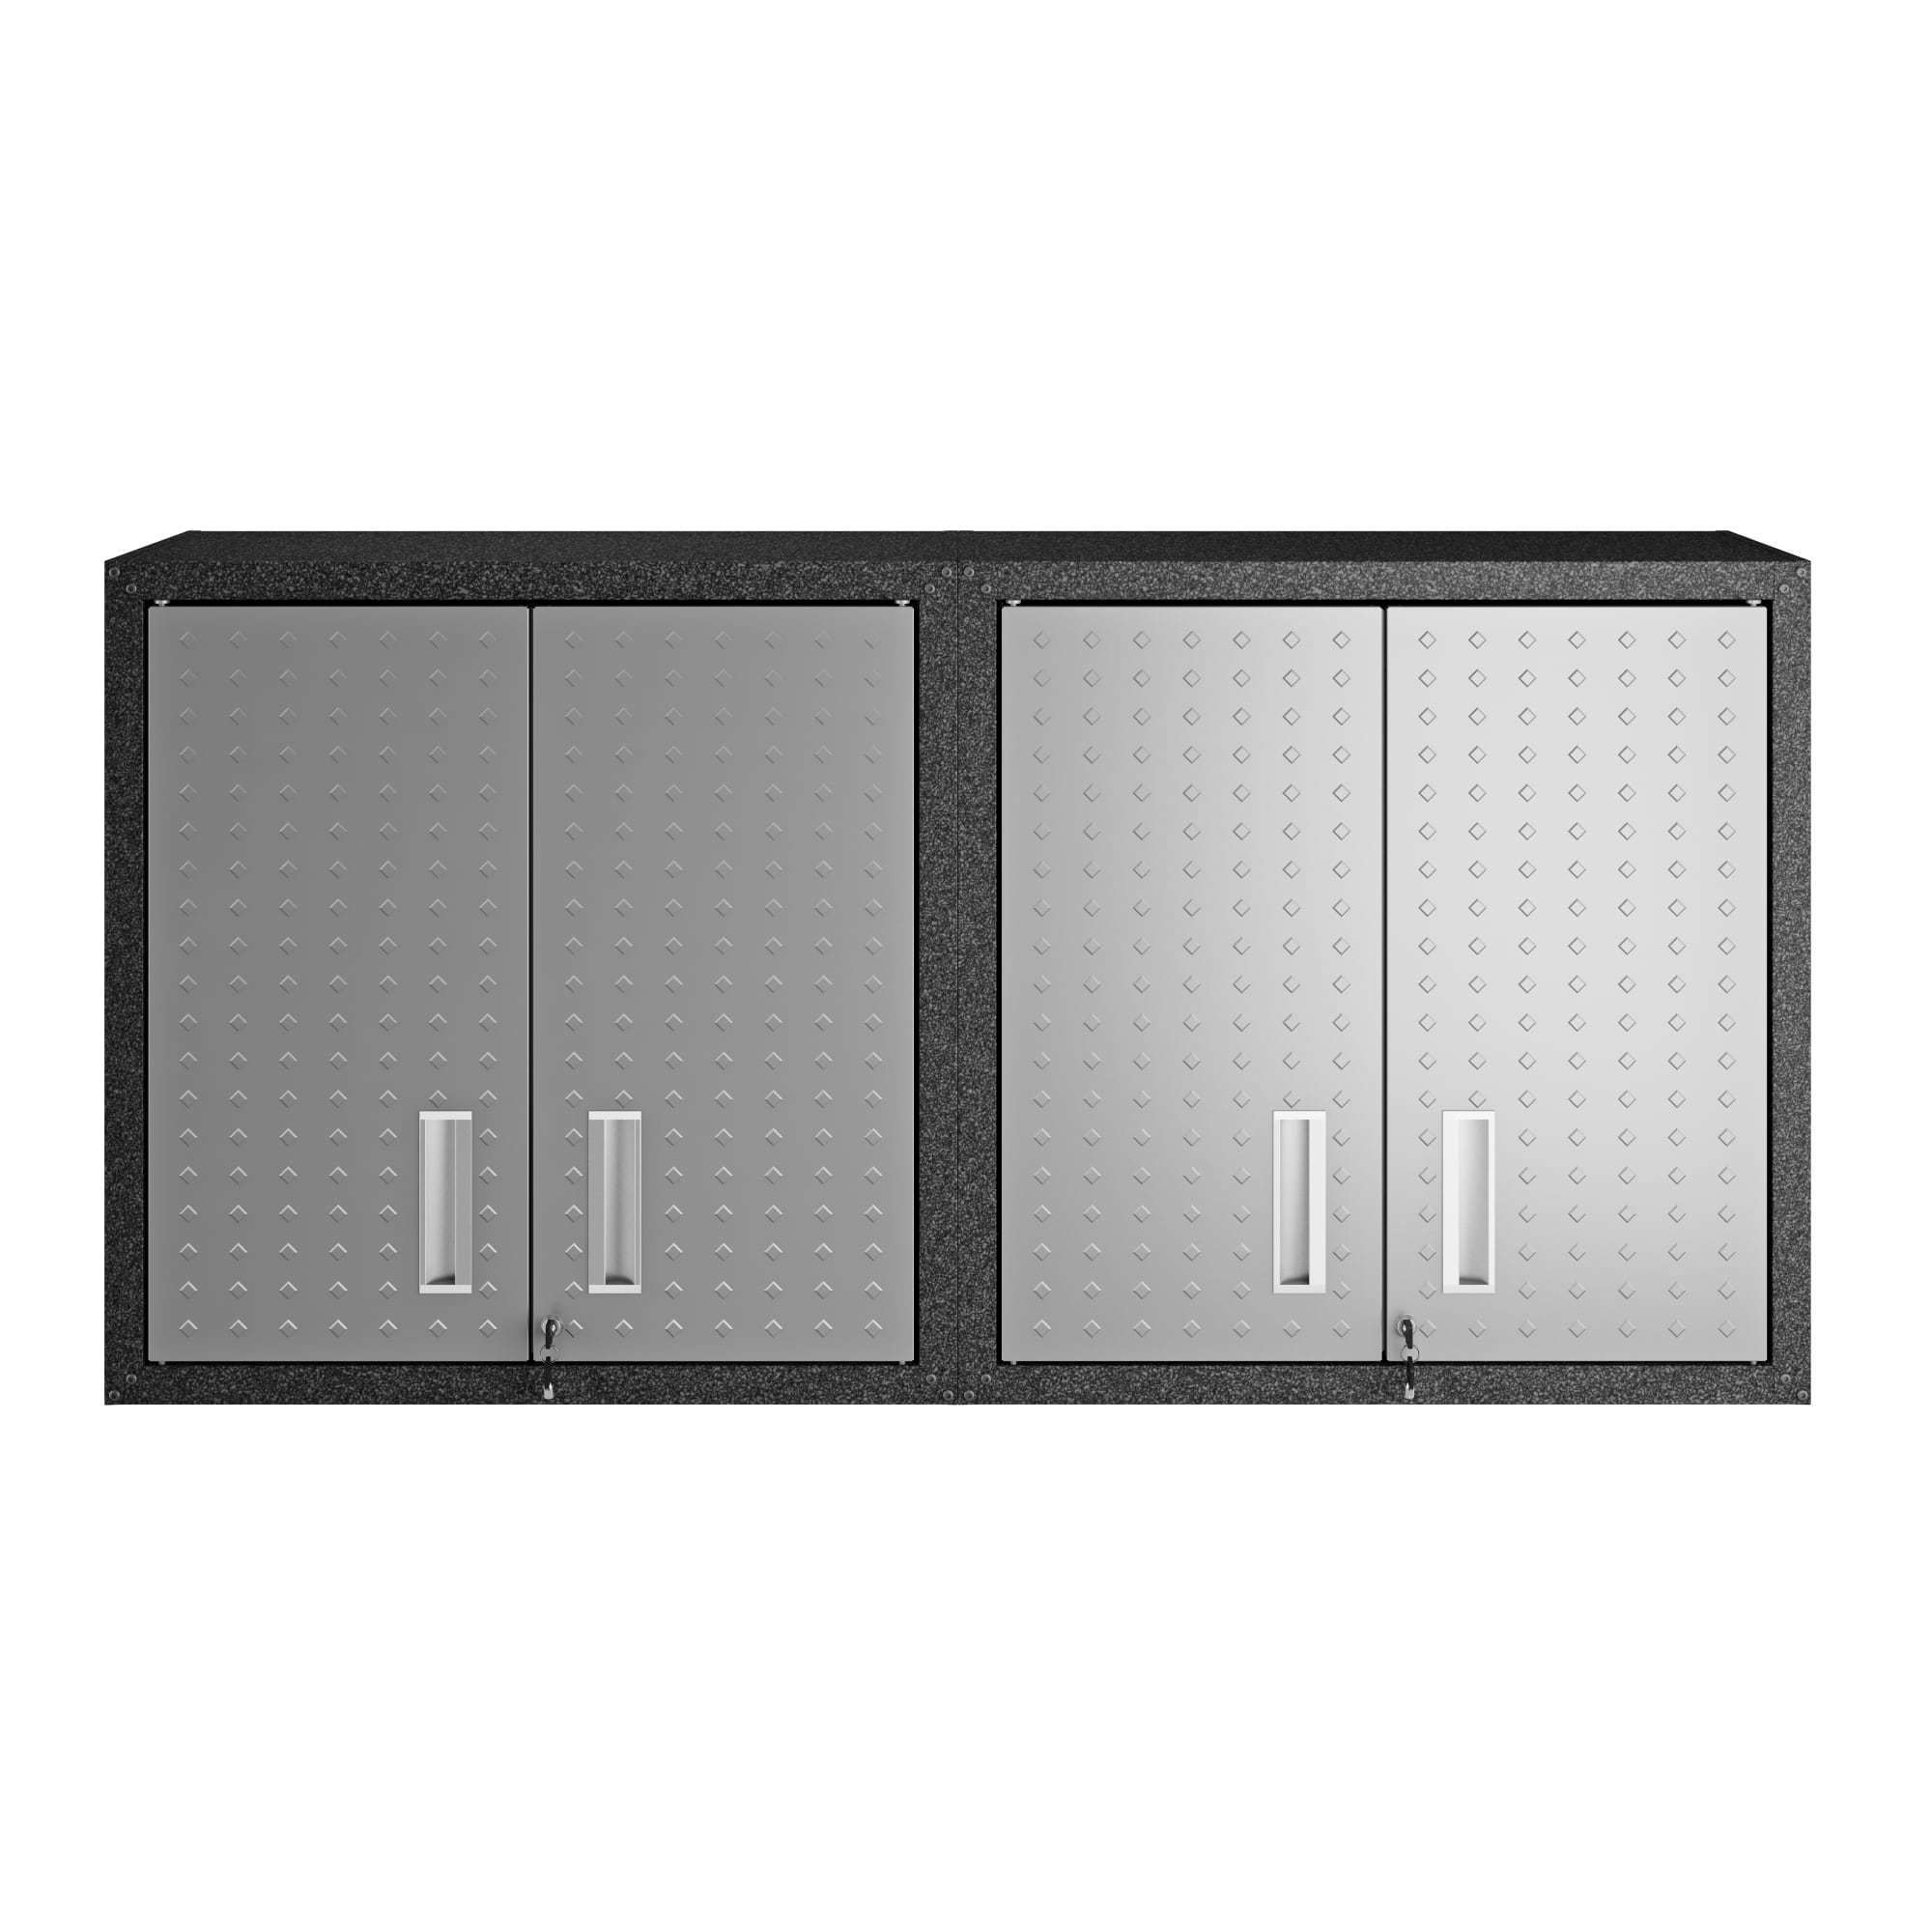 Manhattan Comfort, Fortress Floating Garage Cabinet in Grey Set of 2 Height 30.3 in, Width 30 in, Color Gray, Model 2-5GMC